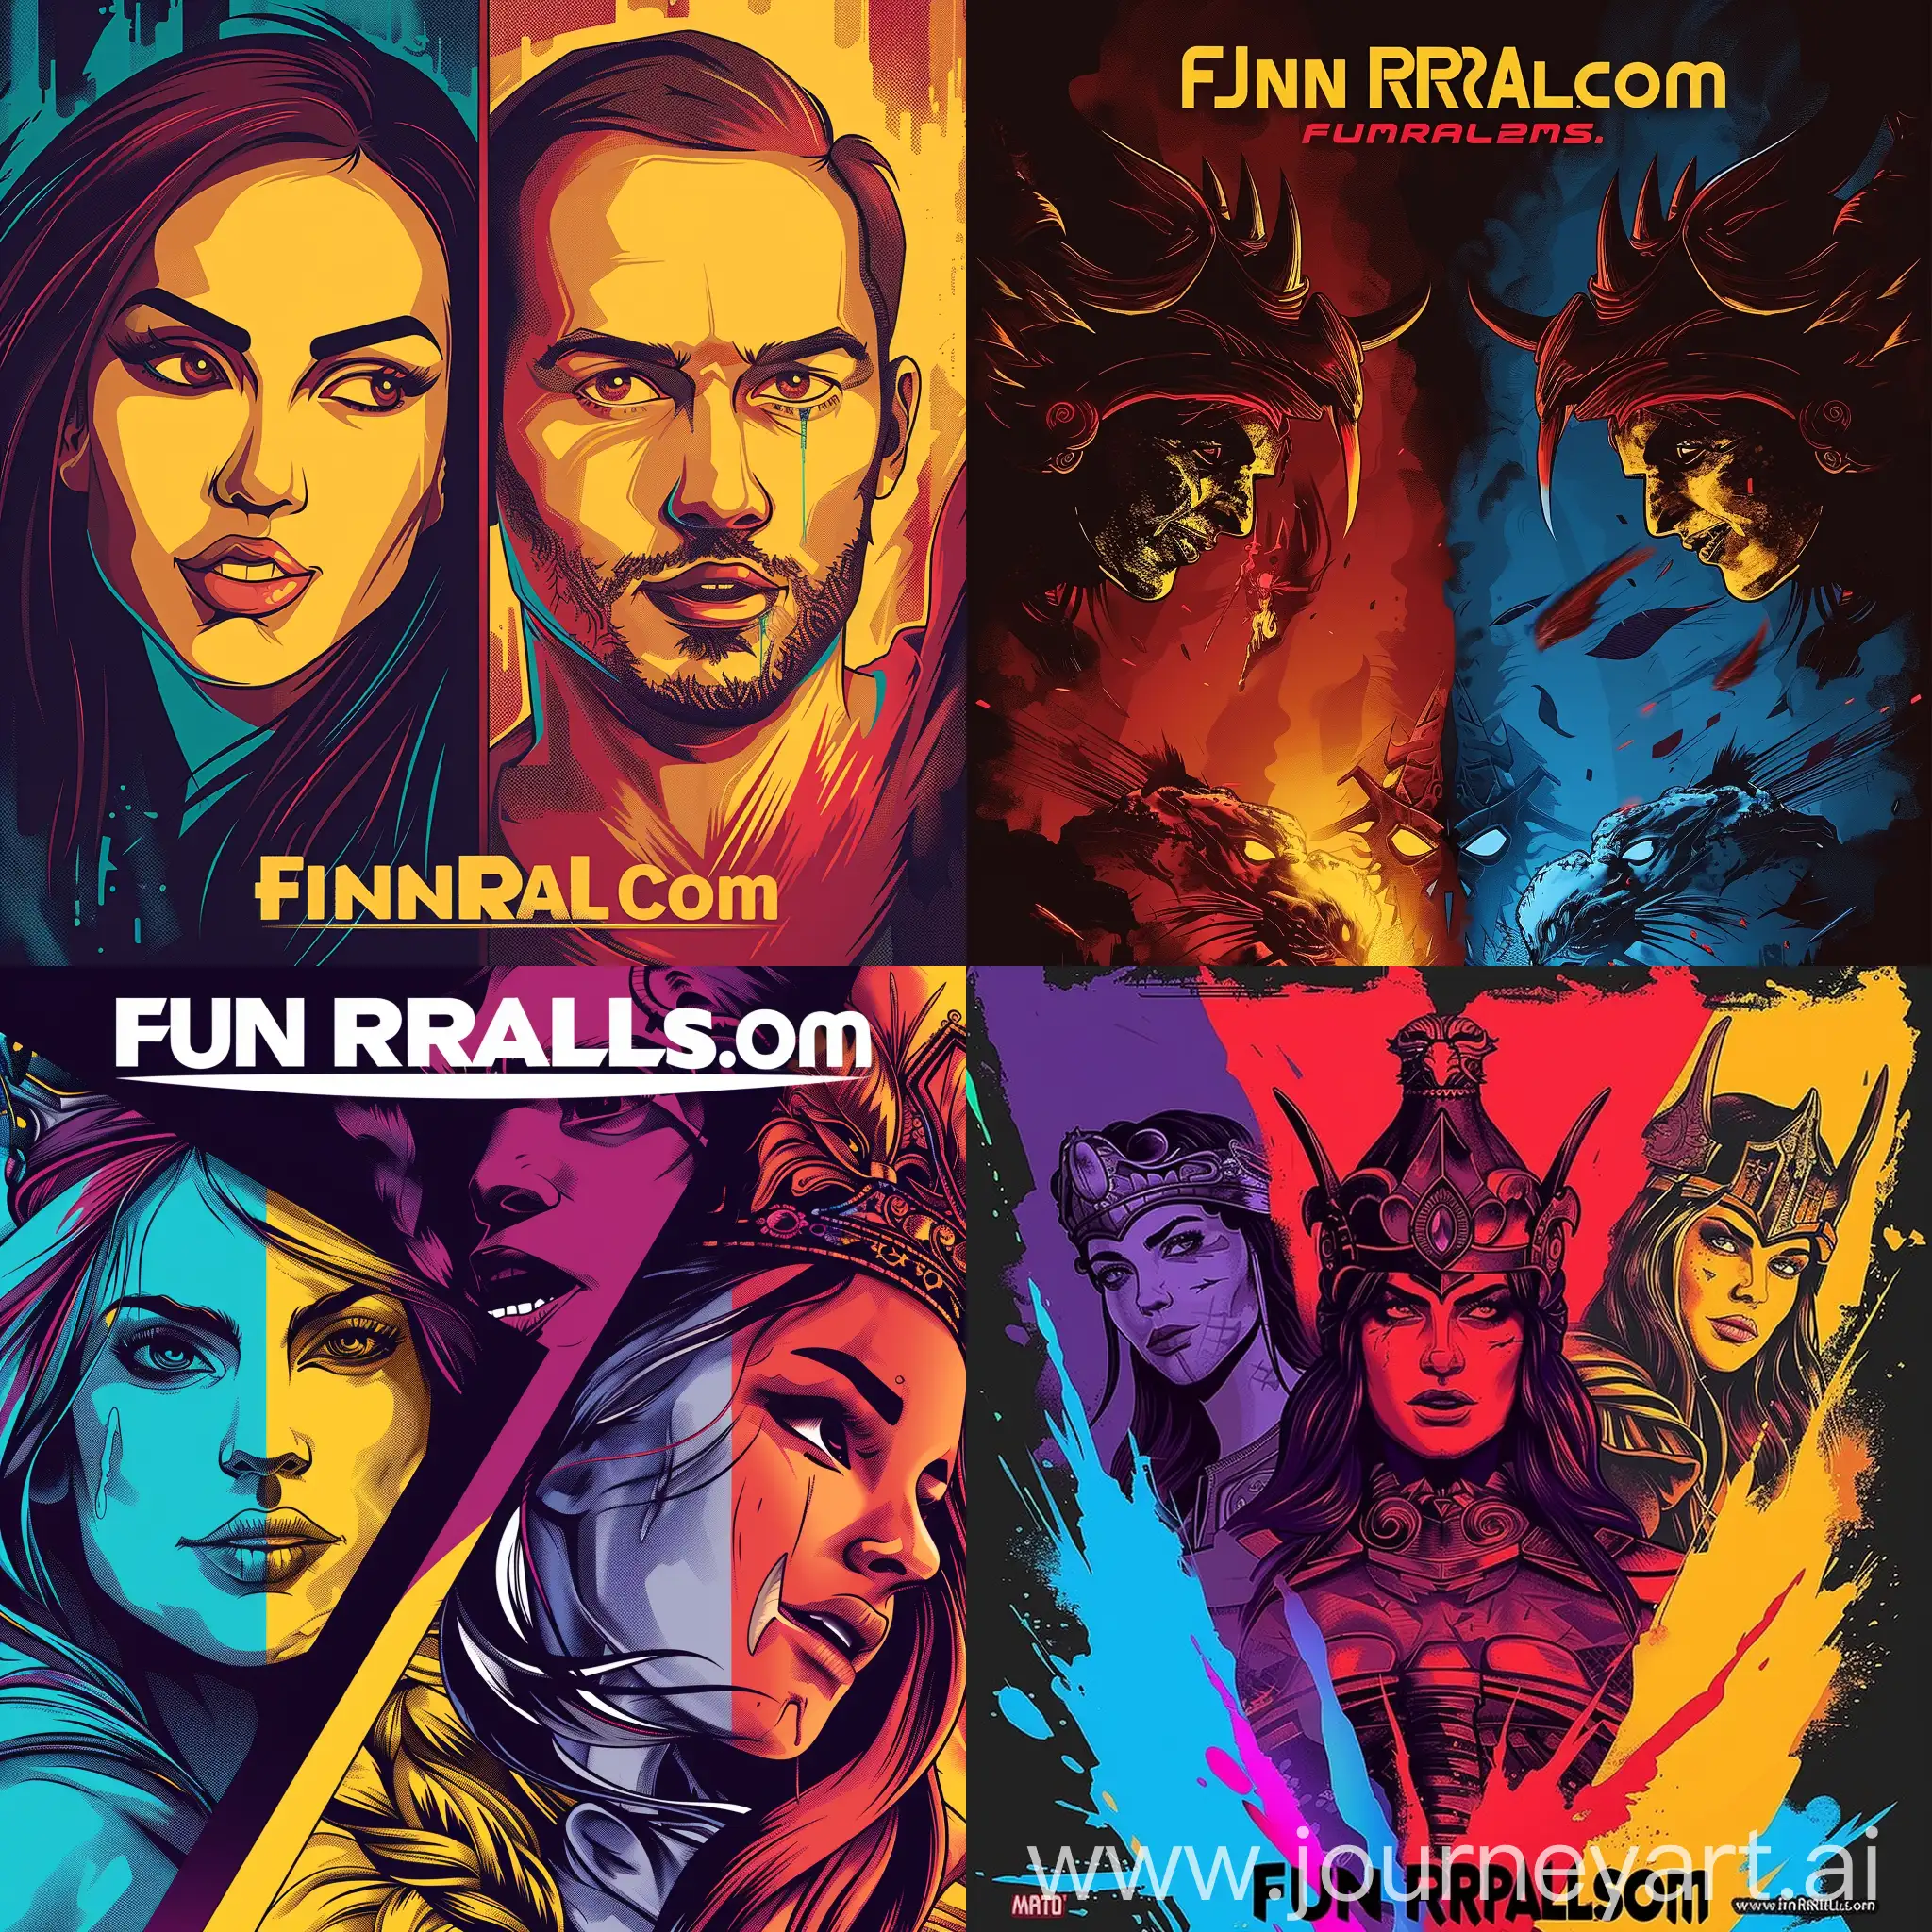 poster for FunRivals.com company with they logo and website, use their colours